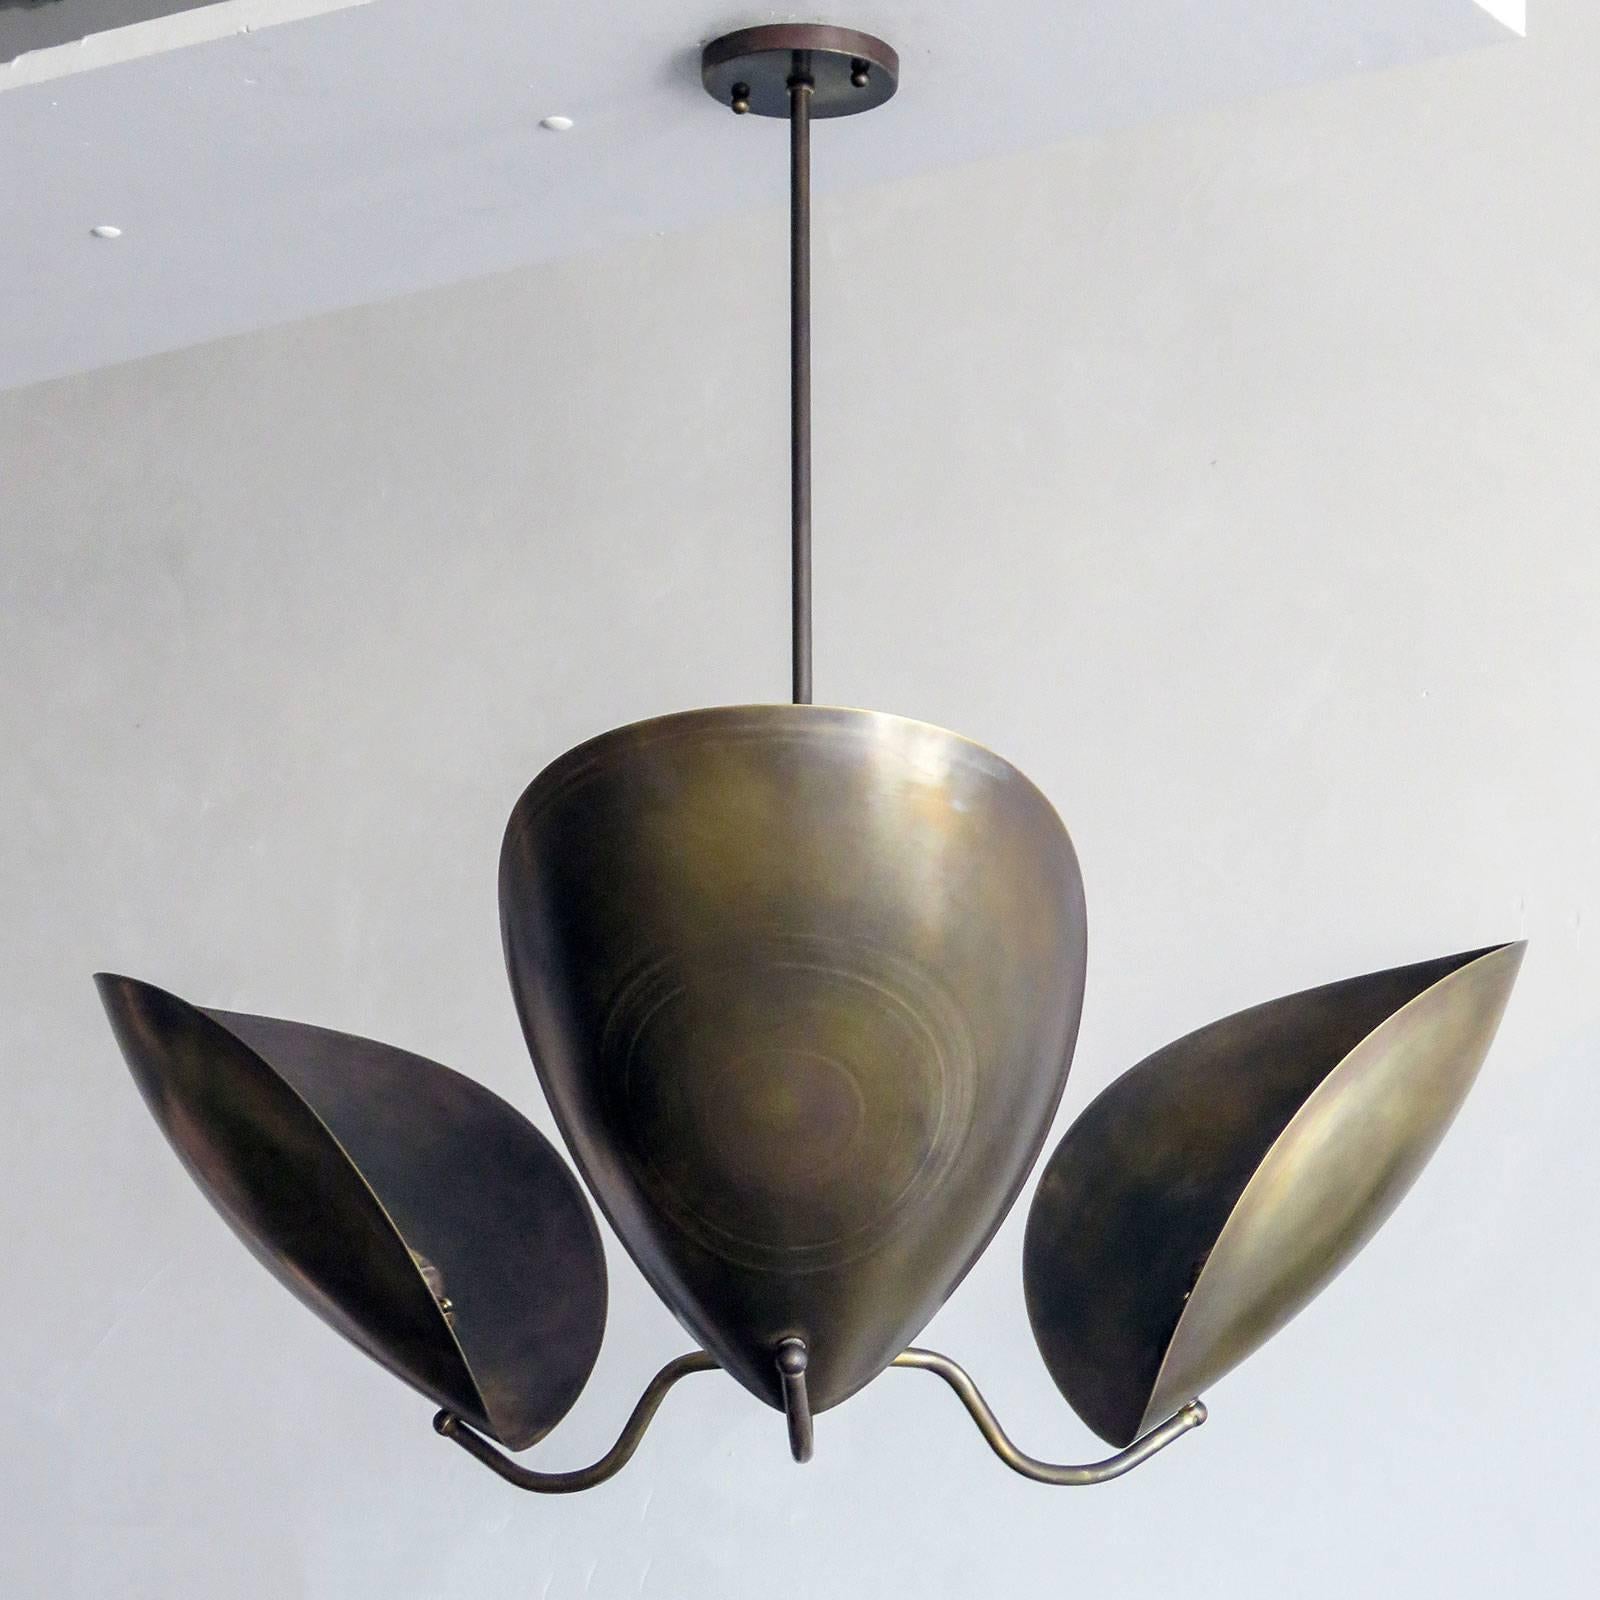 Elegant three shield pendant 'Chiton-3' by Gallery L7, reminiscent of stag beetle armor, in a raw brass finish, overall height can be customized. Three E26 sockets, max. wattage 60w, wired for US standards or European standards (110v/220v), UL